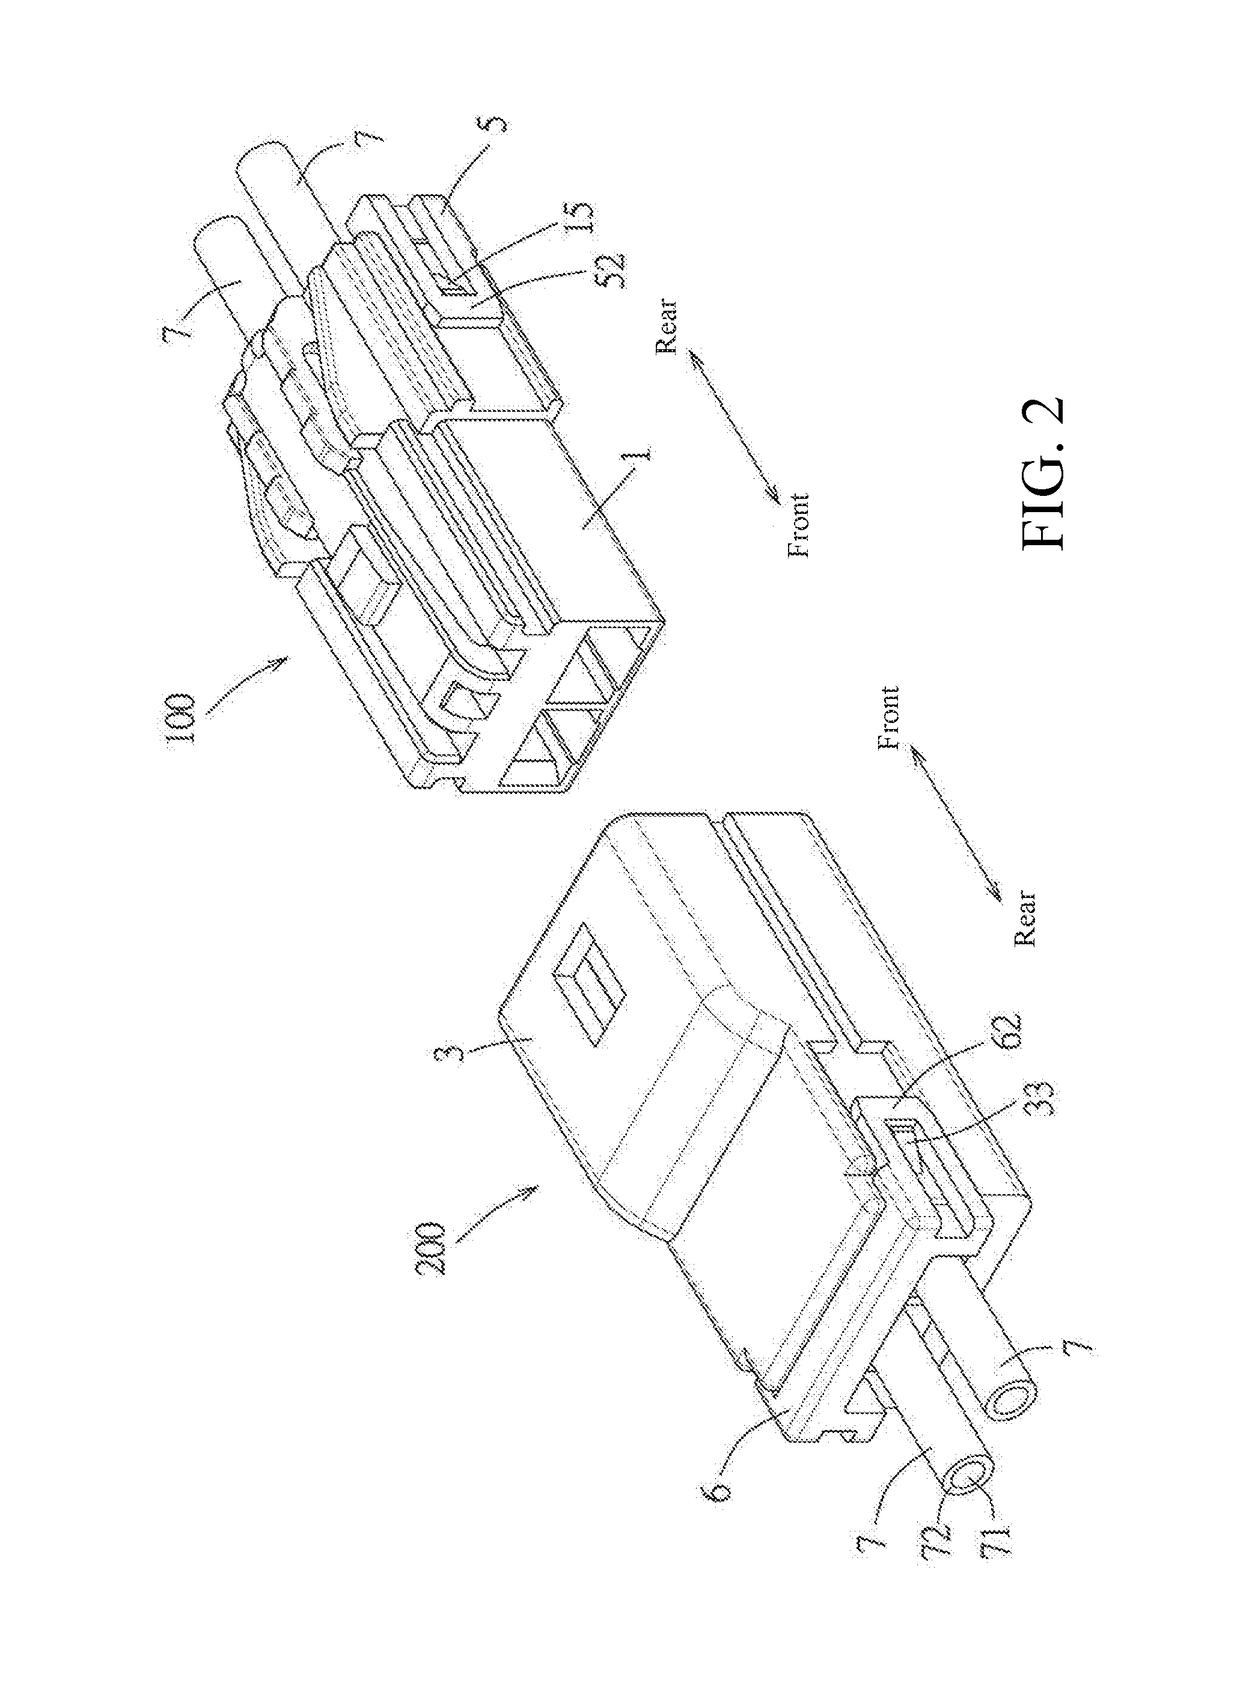 Conductive terminal and electrical connector assembly